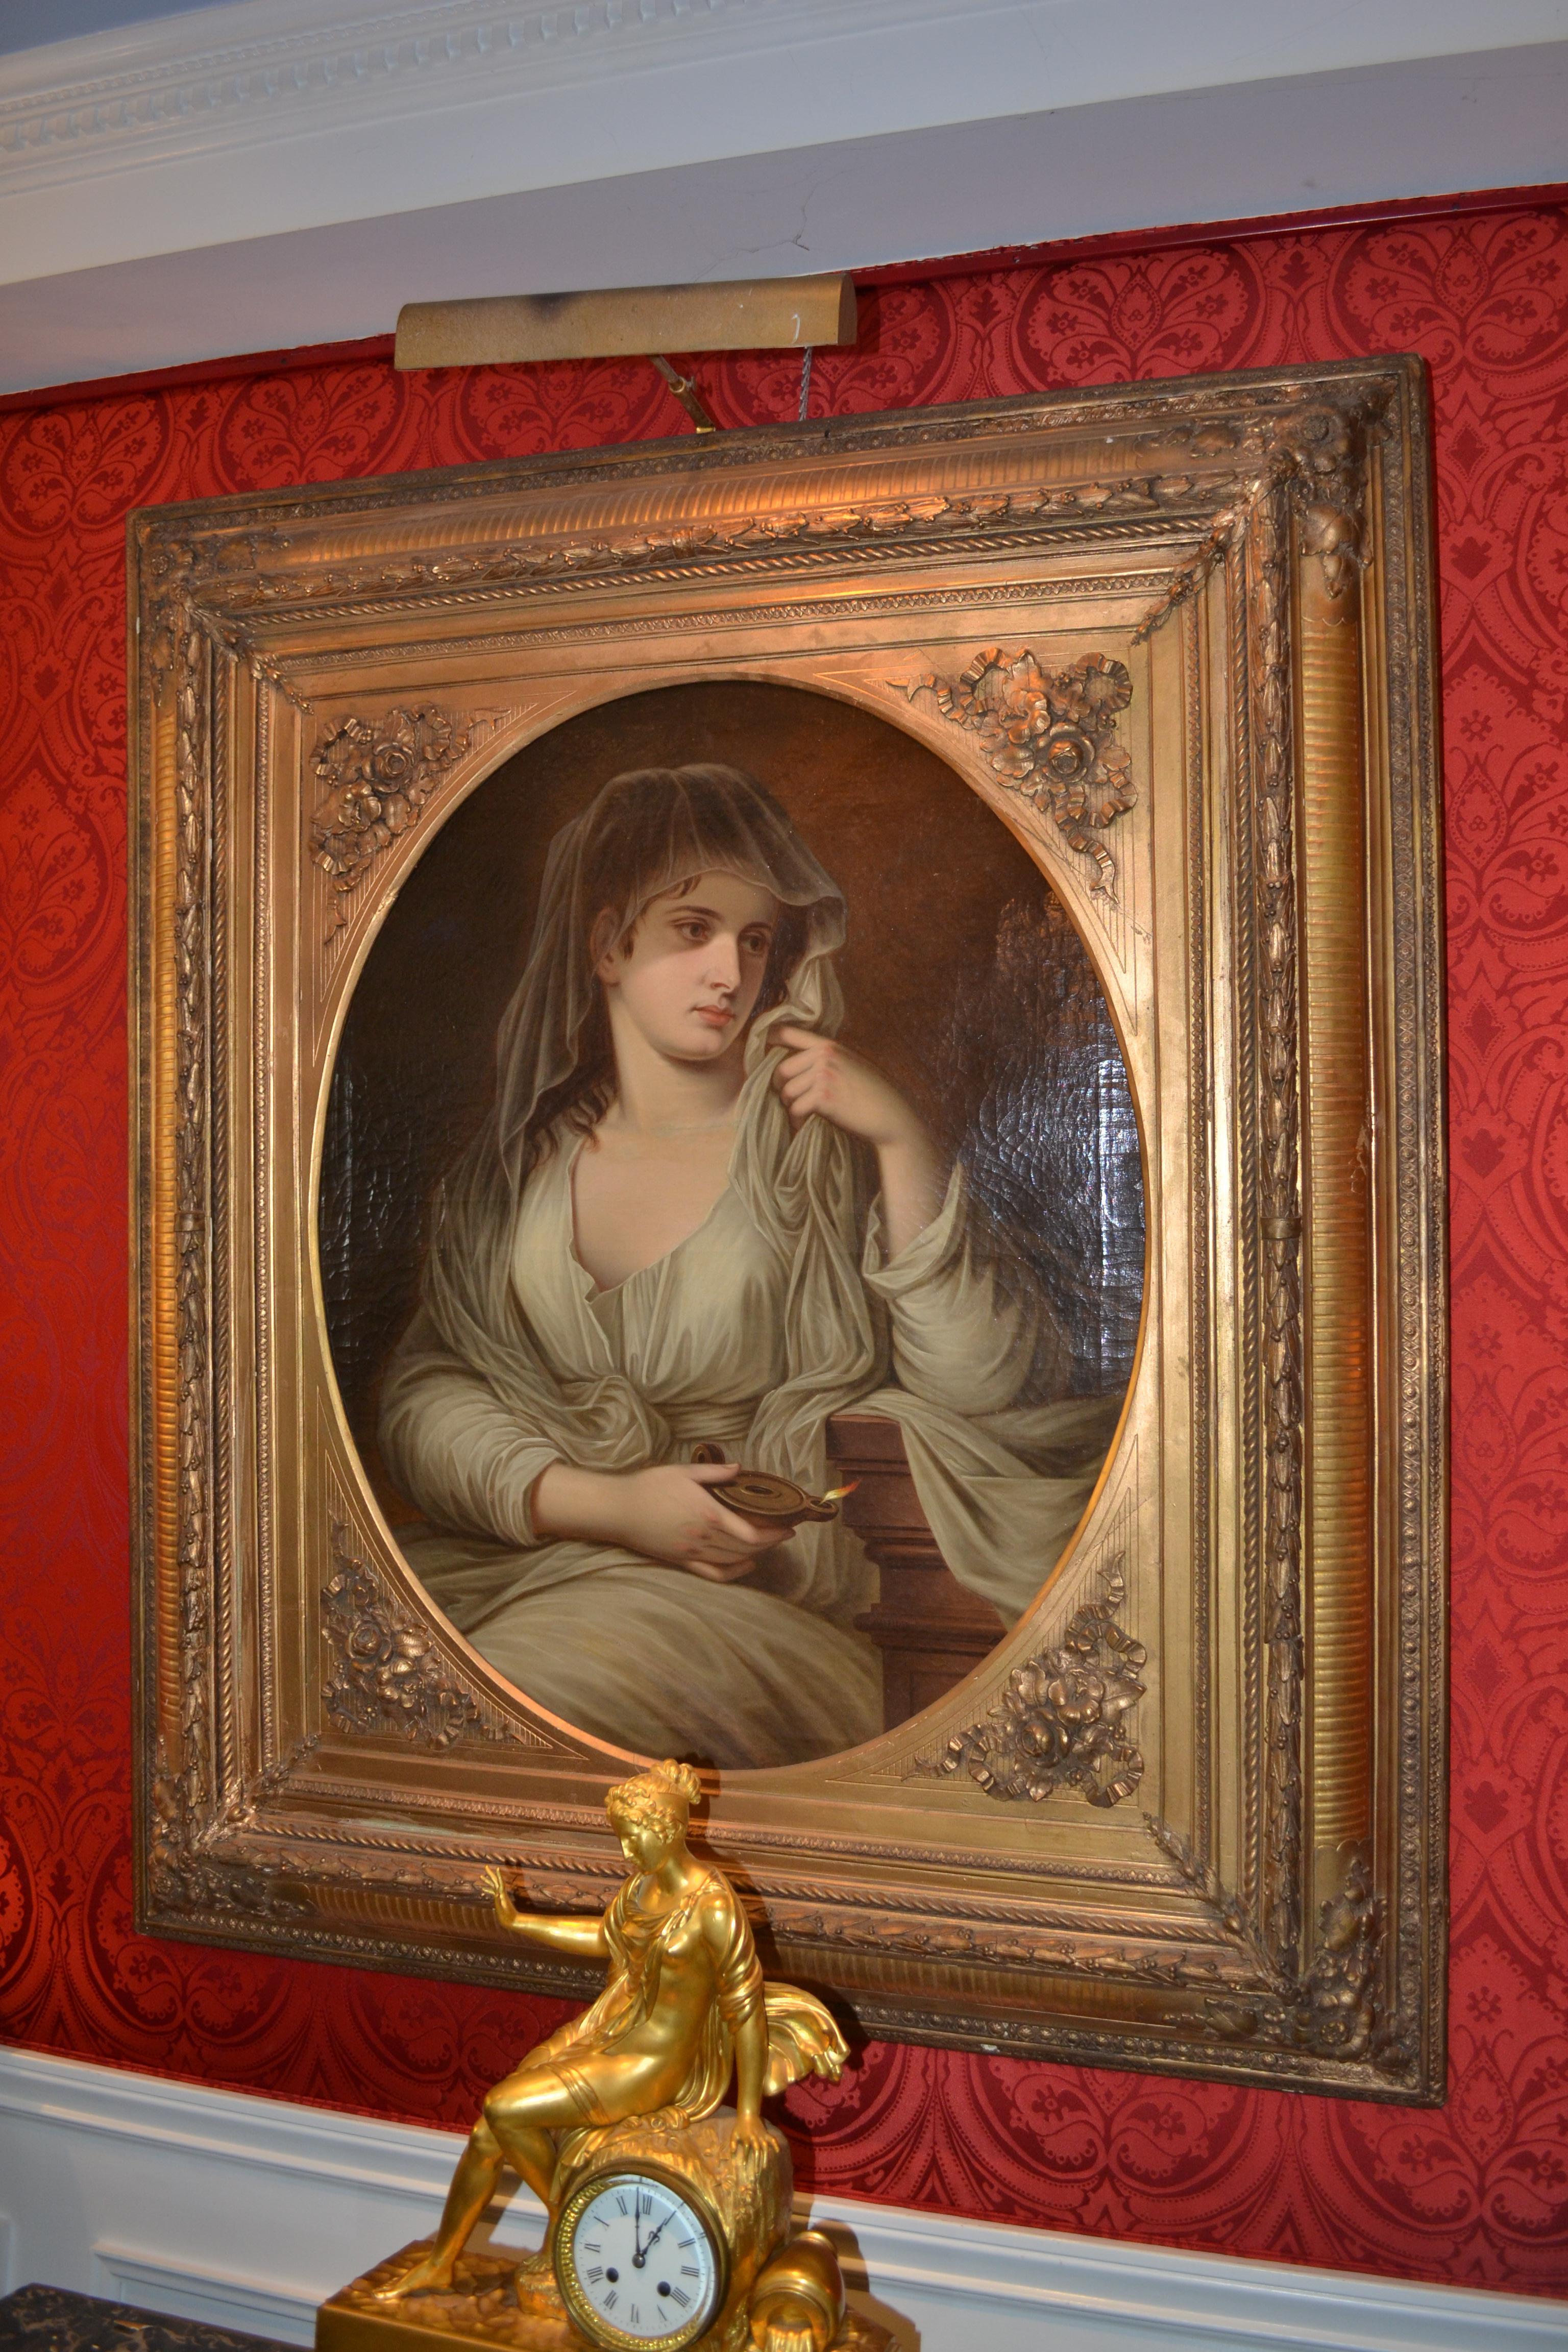 An oil painting on canvas showing a portrait of a  classical maiden depicted as a vestal virgin dressed in classical attire, having chestnut hair concealed by a guarnello or thin veil and holding a Roman oil lamp.

The painting signed “F. Hofelder